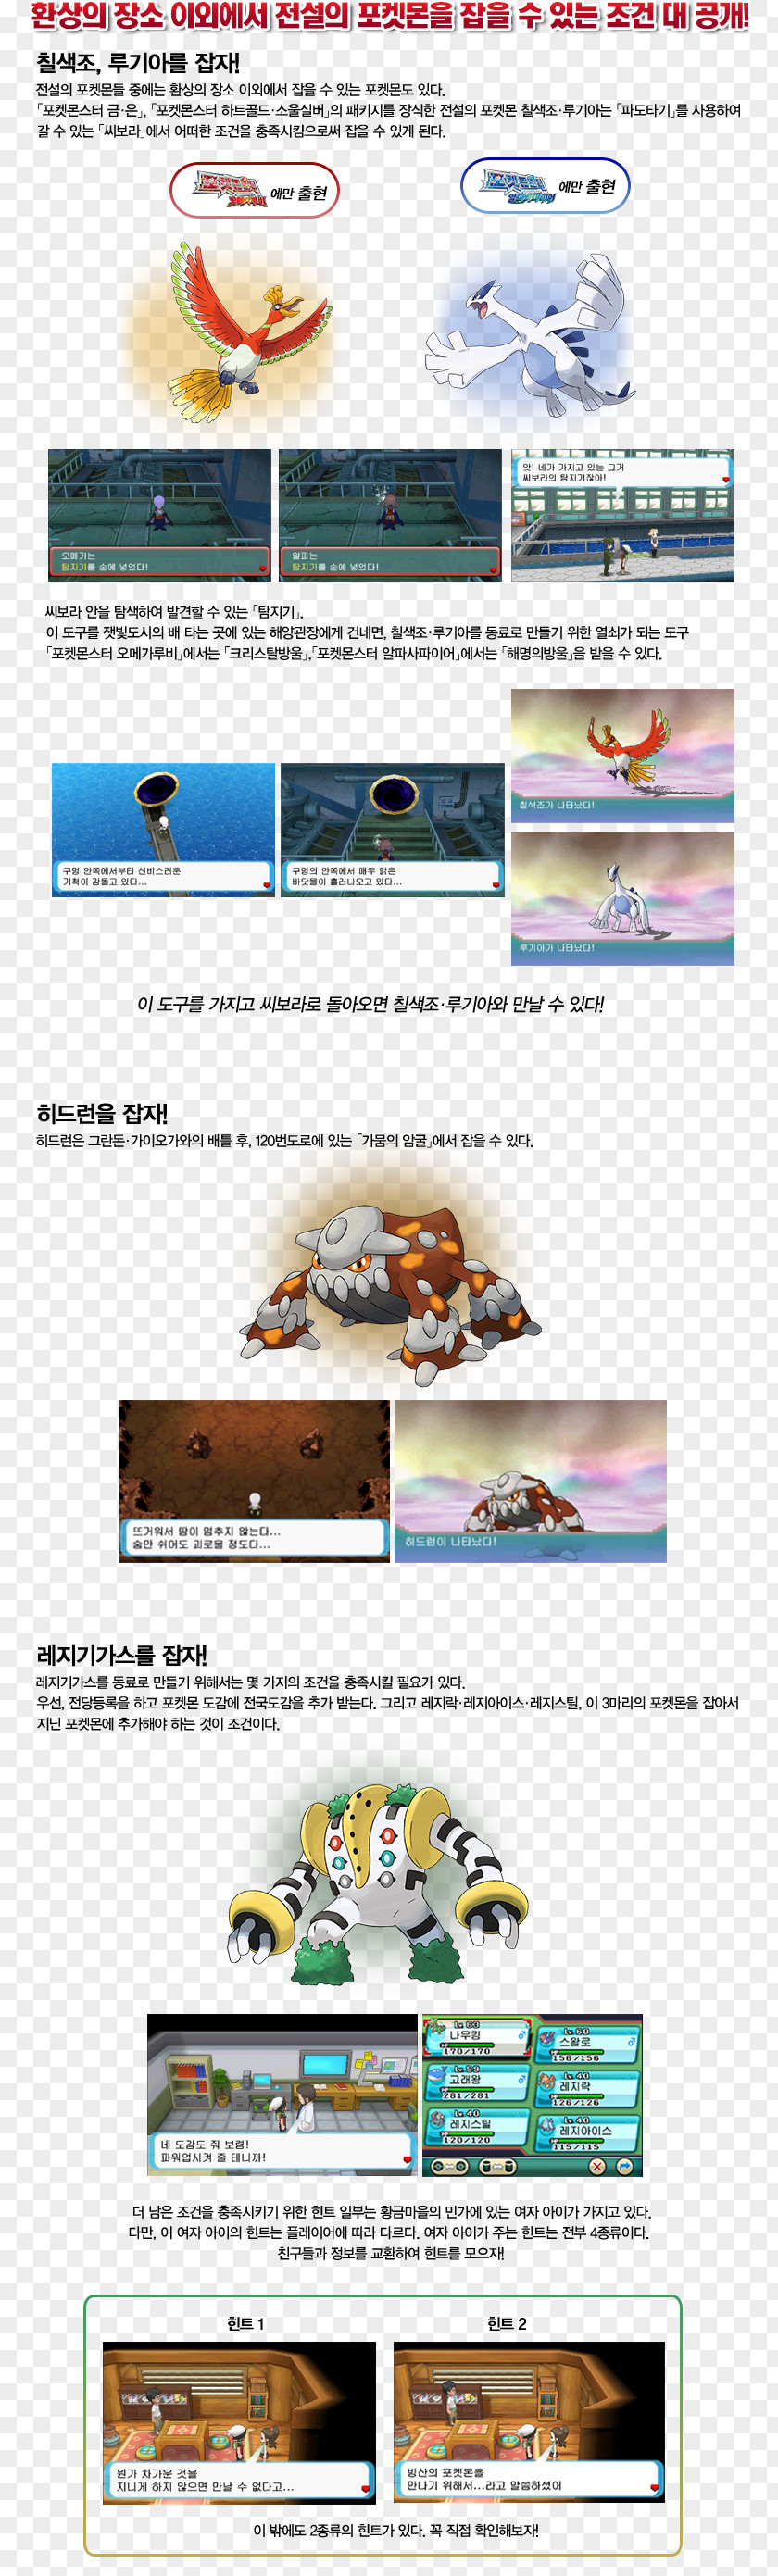 Templates Pokémon HeartGold And SoulSilver Platinum ポケットモンスタープラチナ公式完全クリアガイド Web Page PNG